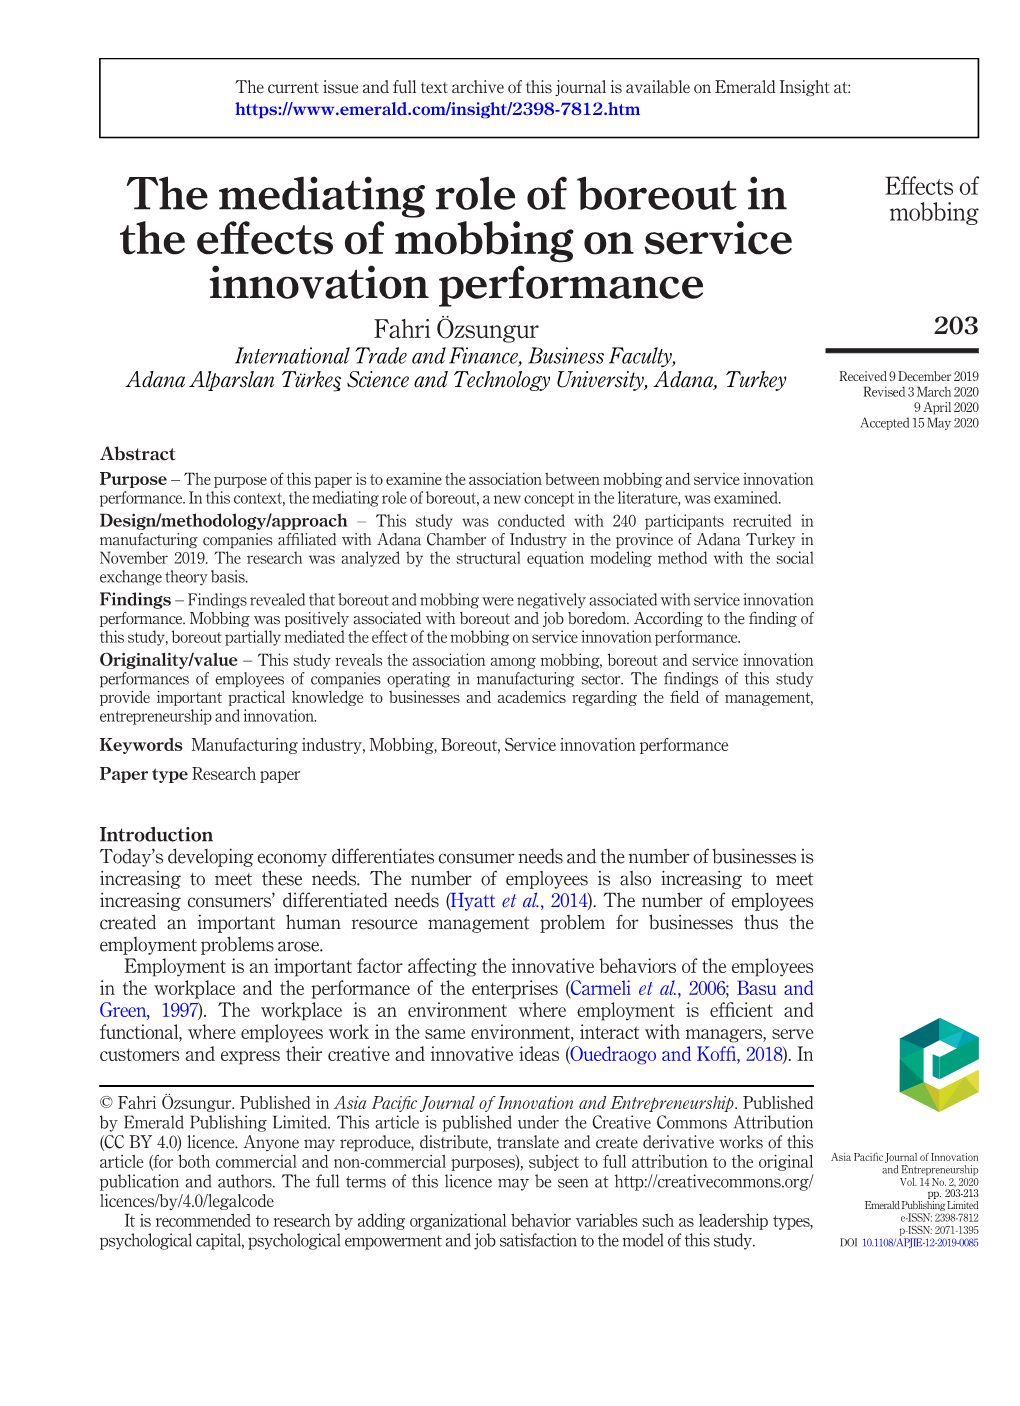 The Mediating Role of Boreout in the Effects of Mobbing on Service Innovation Performance